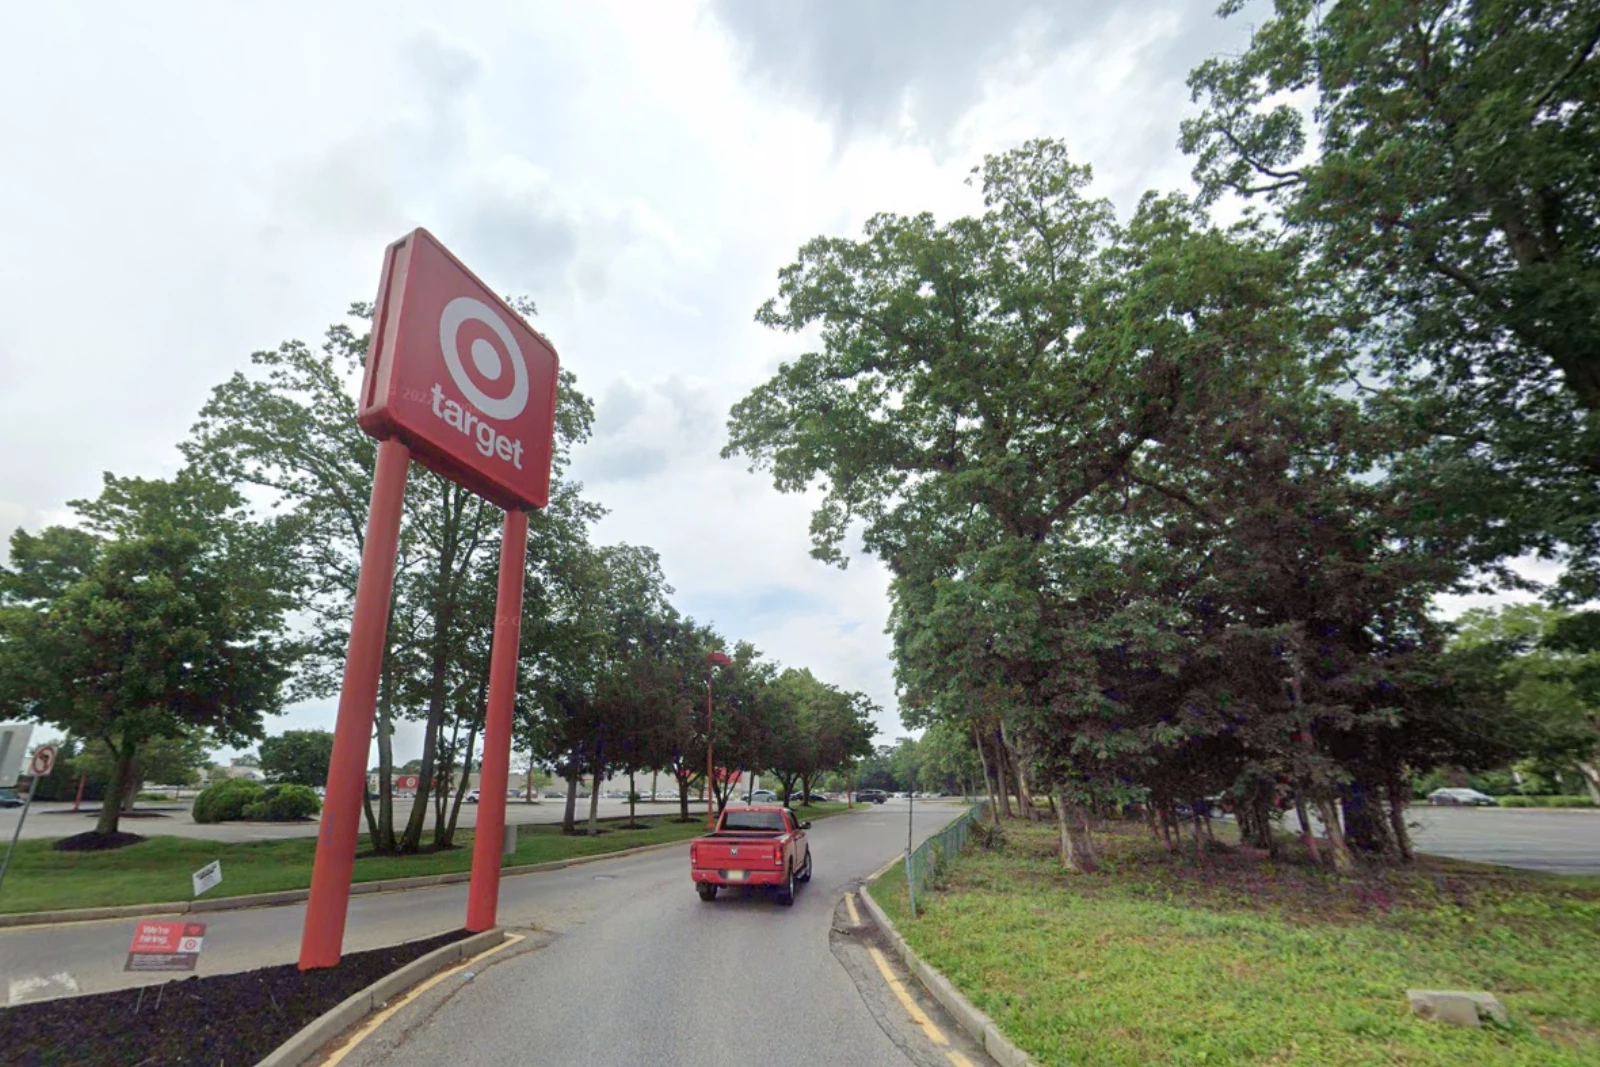 Alleged sexual assault in Toms River NJ Target parking lot - Photo: Google Maps